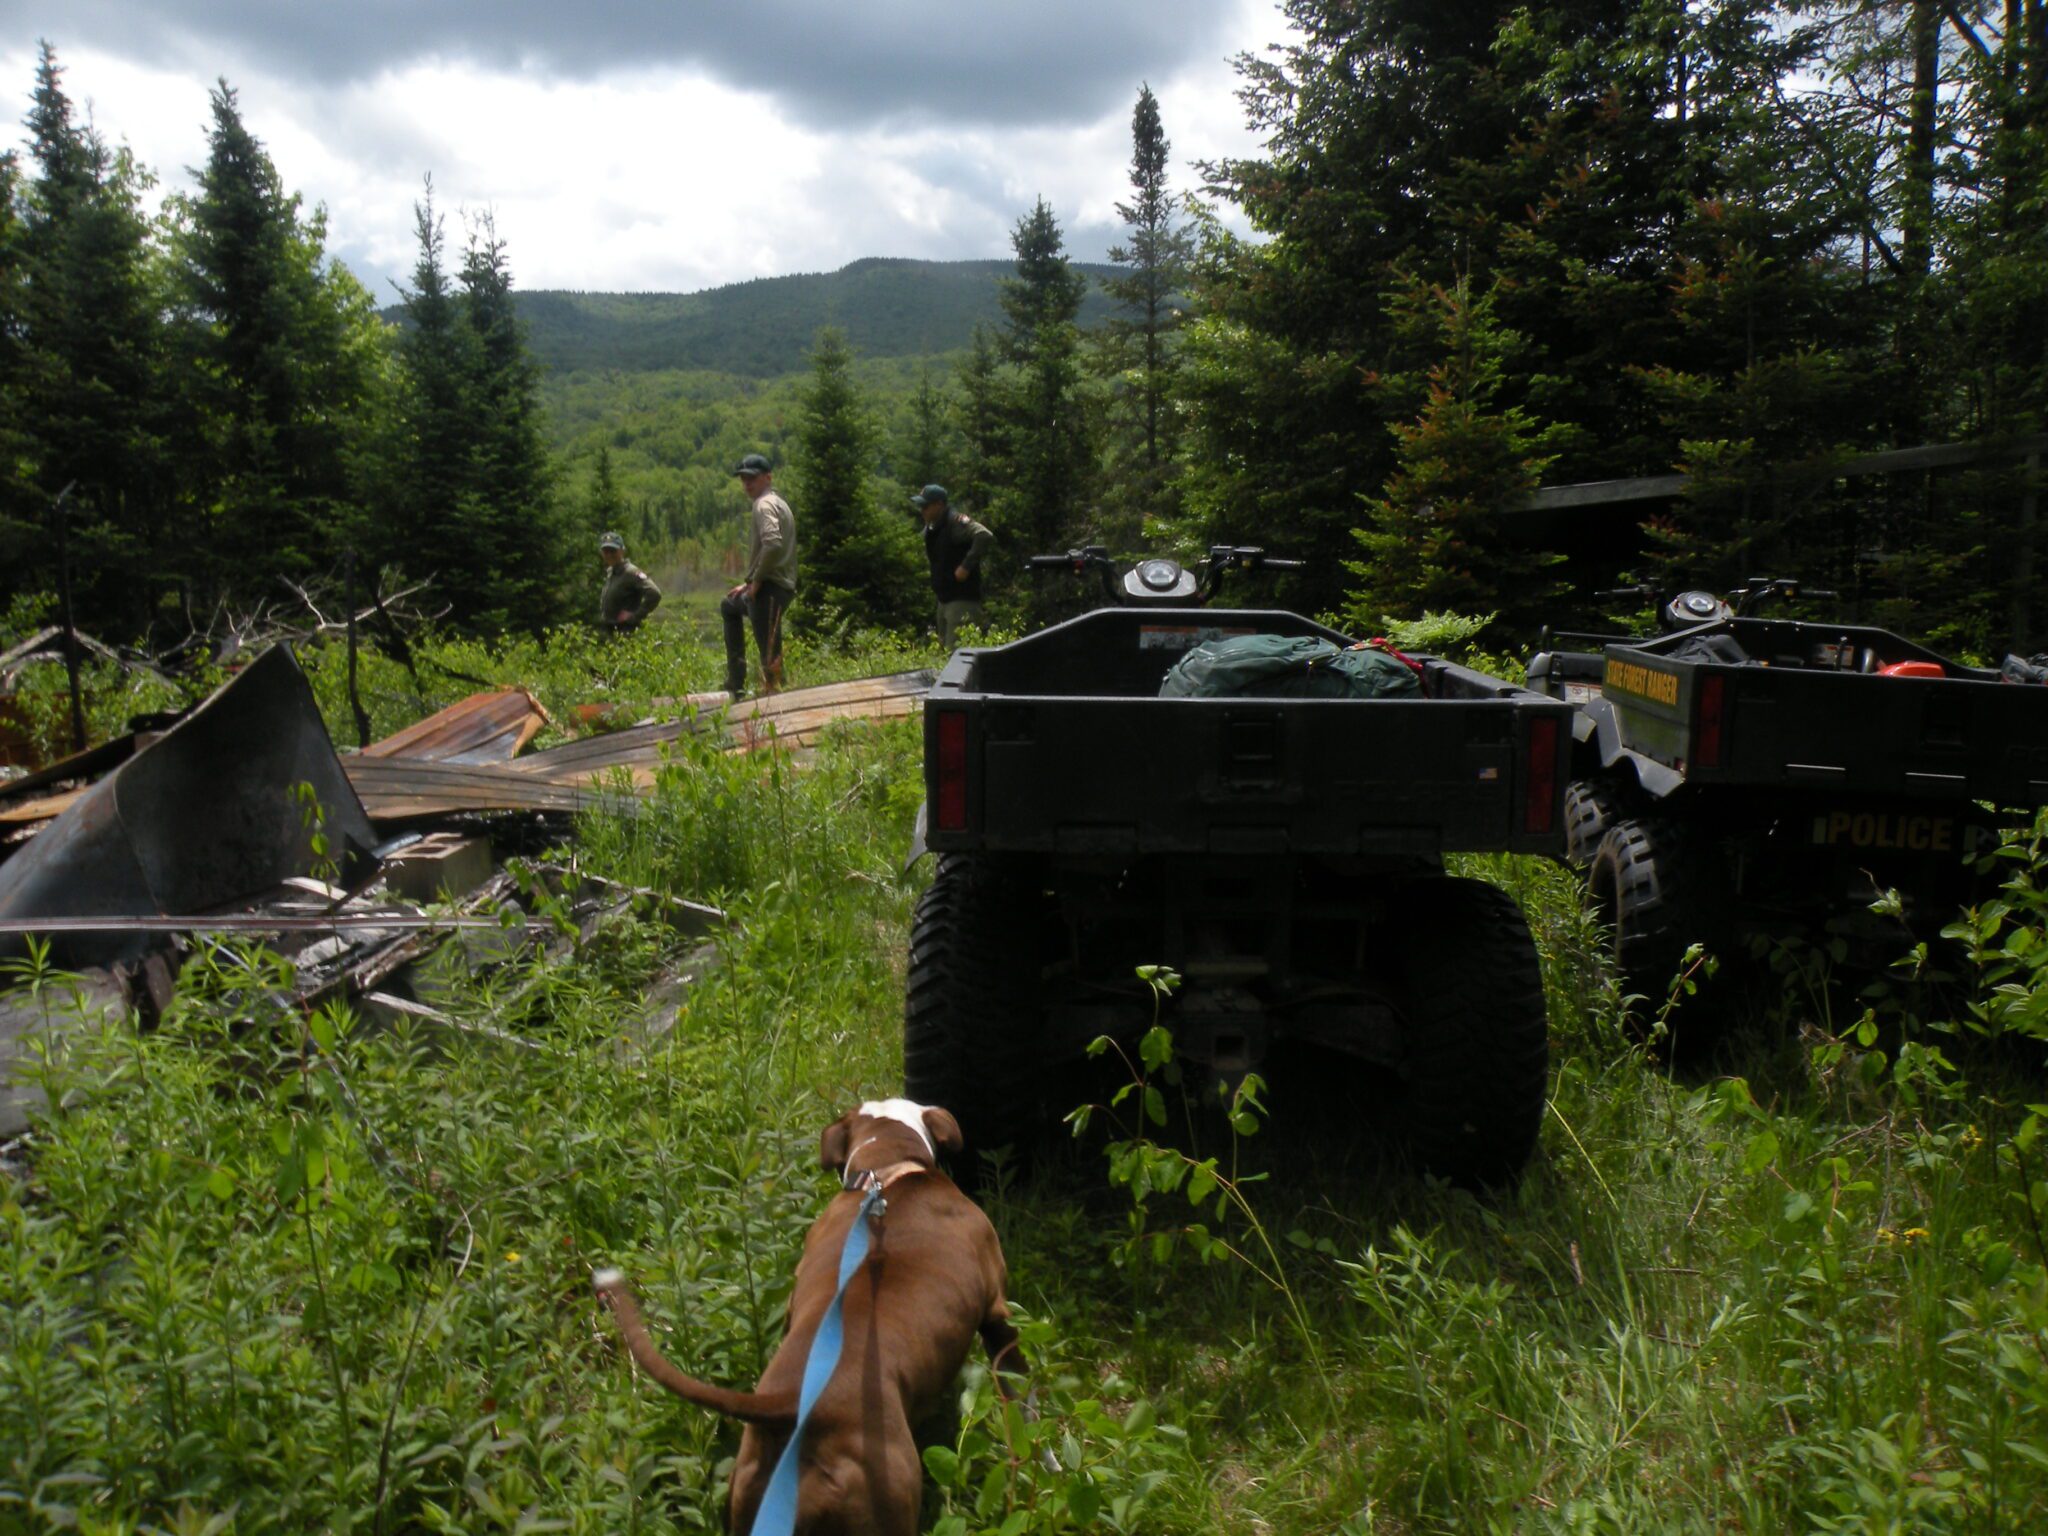 DEC staff with ATVs observed within the West Canada Lake Wilderness, 2023.